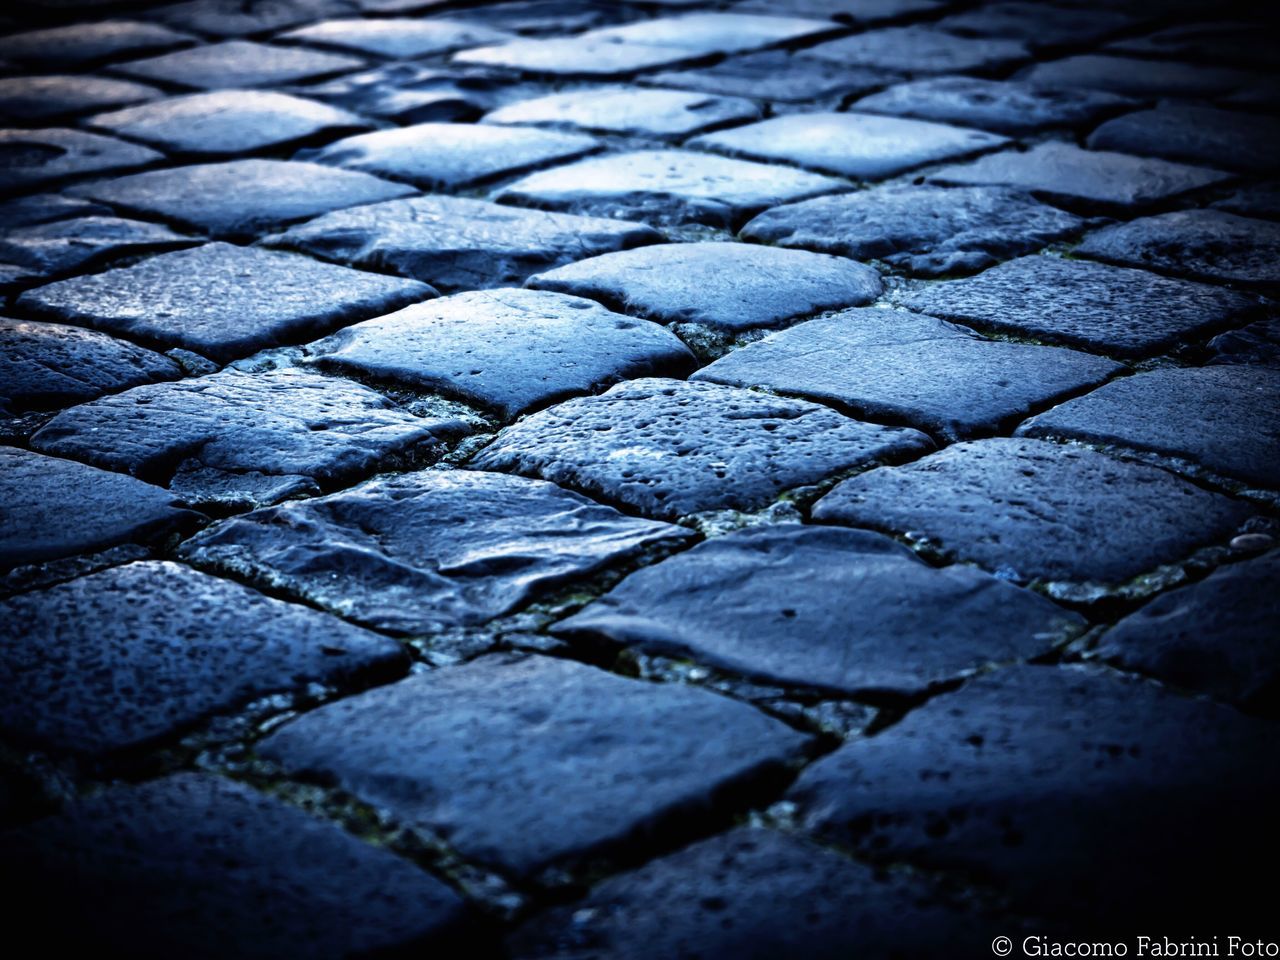 full frame, backgrounds, cobblestone, pattern, textured, street, high angle view, paving stone, surface level, asphalt, outdoors, no people, sunlight, day, footpath, close-up, road, repetition, detail, wet